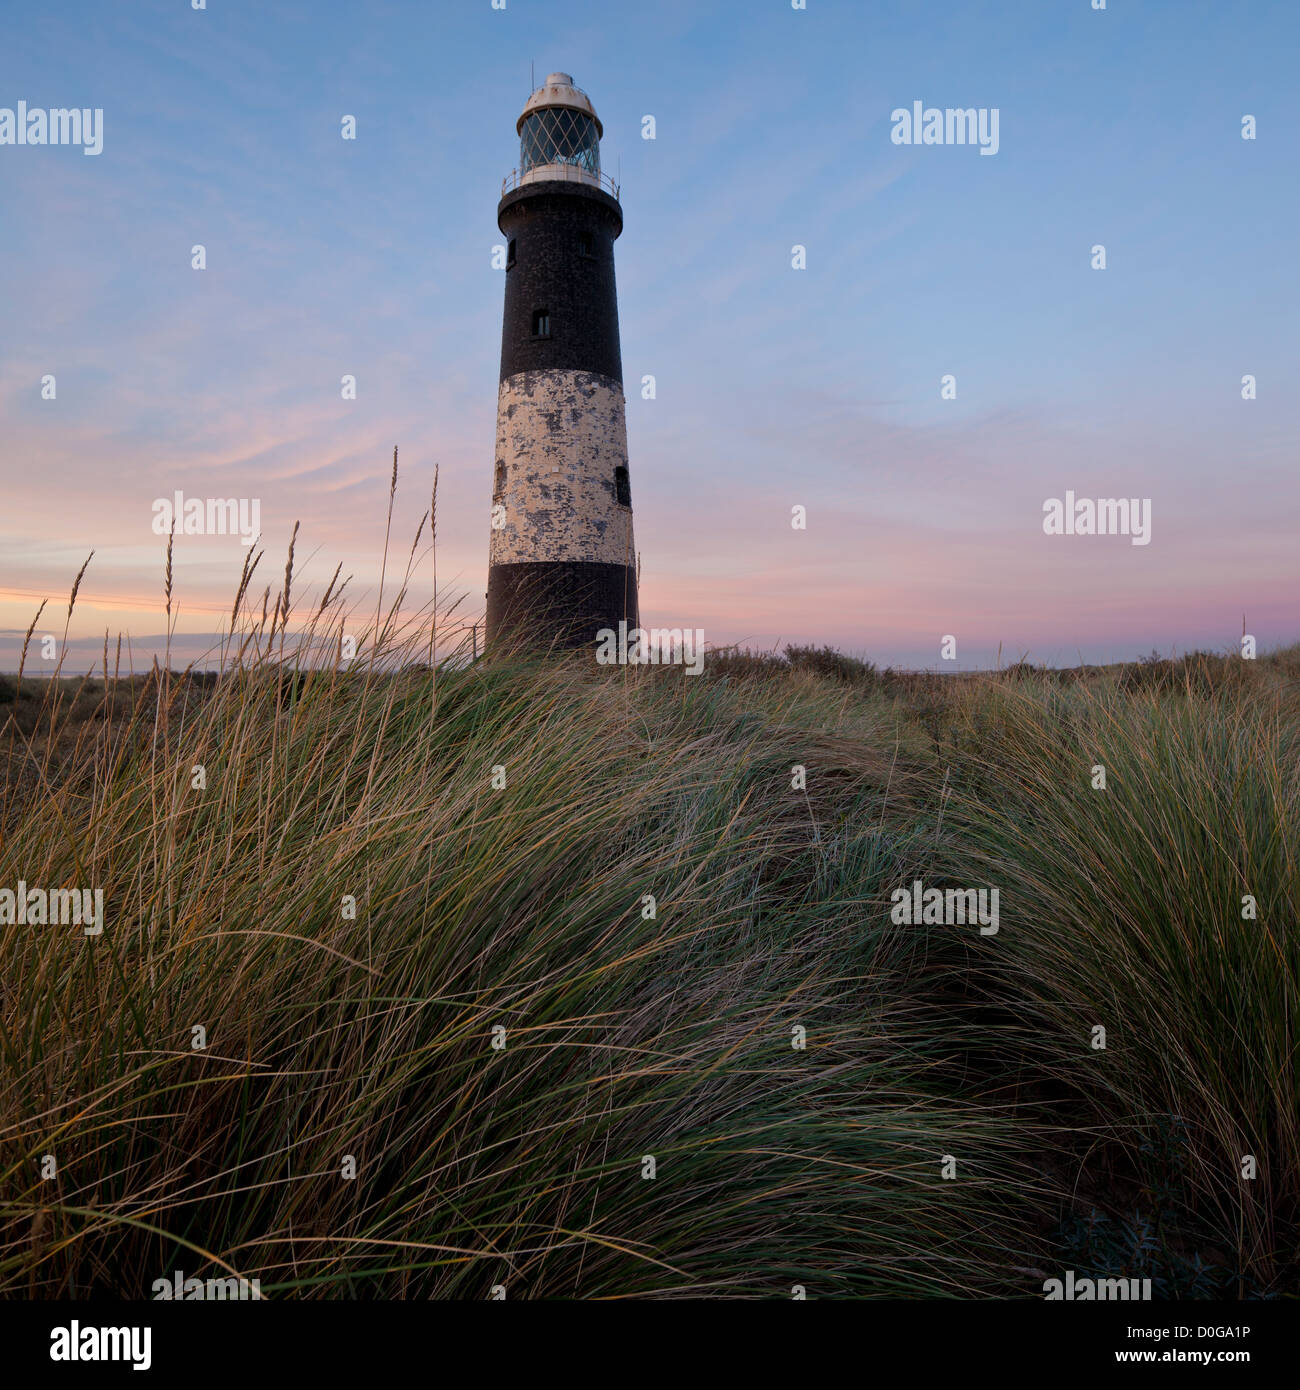 The Spurn Lighthouse and Marram Grass at sunset, Spurn Point, Humberside, East Yorkshire, UK Stock Photo